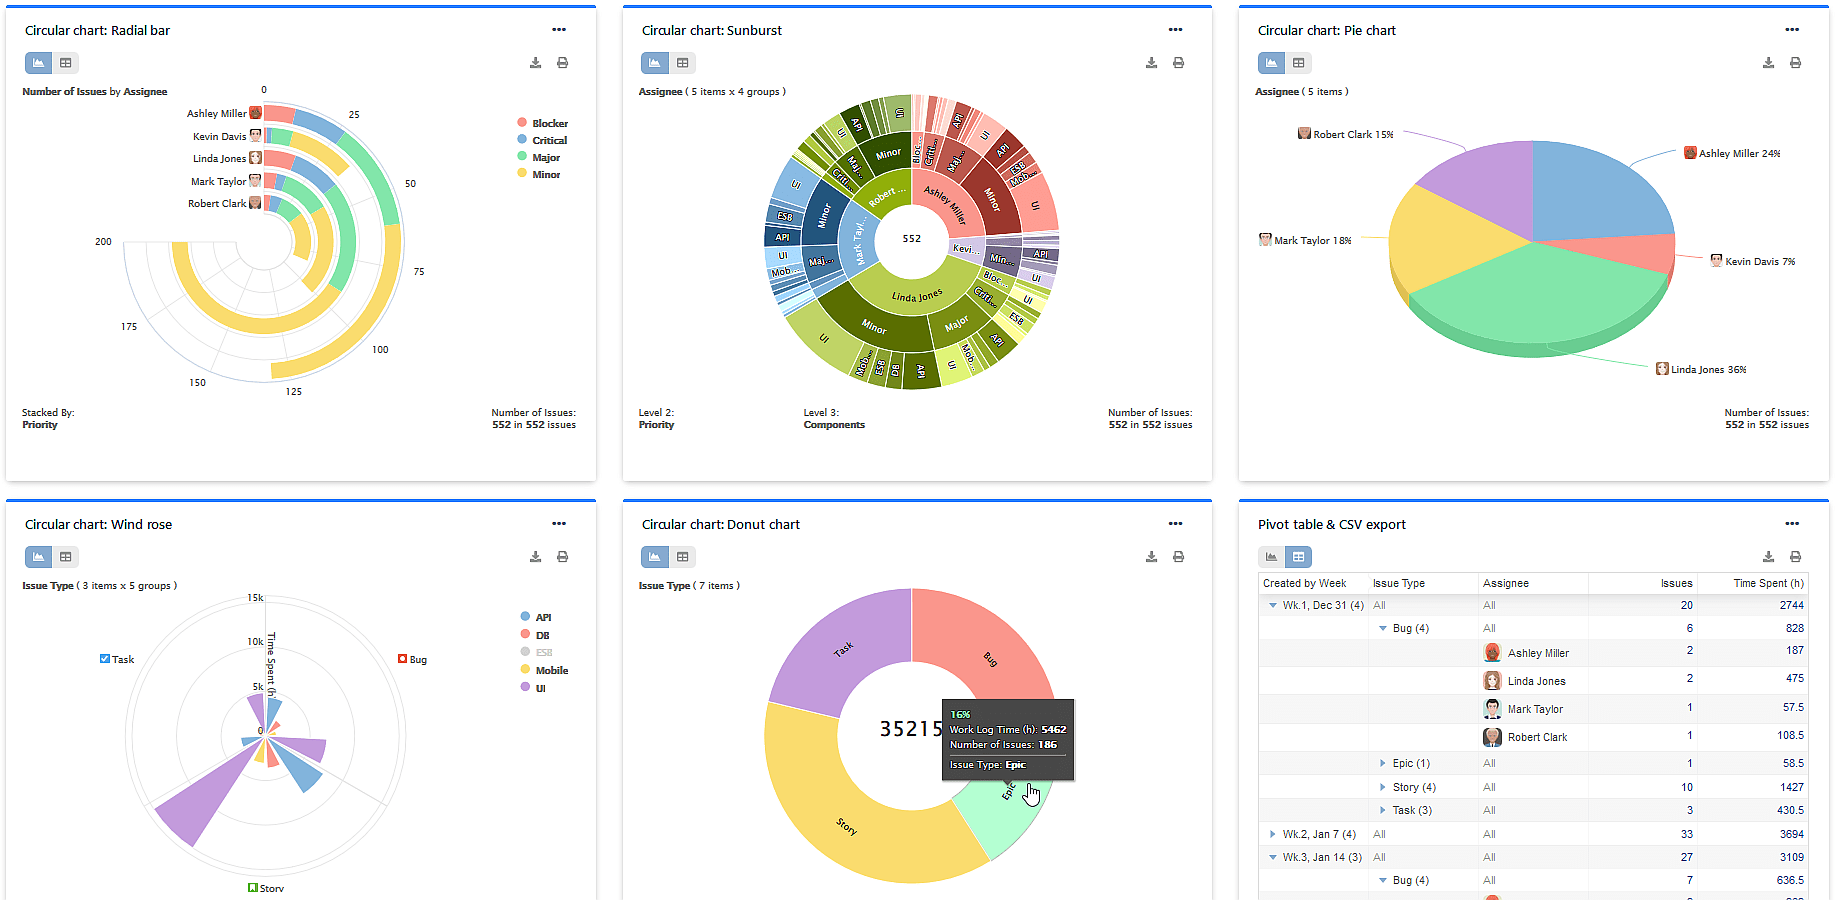 Chart types for Performance Objectives for Jira app - circular charts - radial bar, sunburst, pie chart, donut chart, wind rose